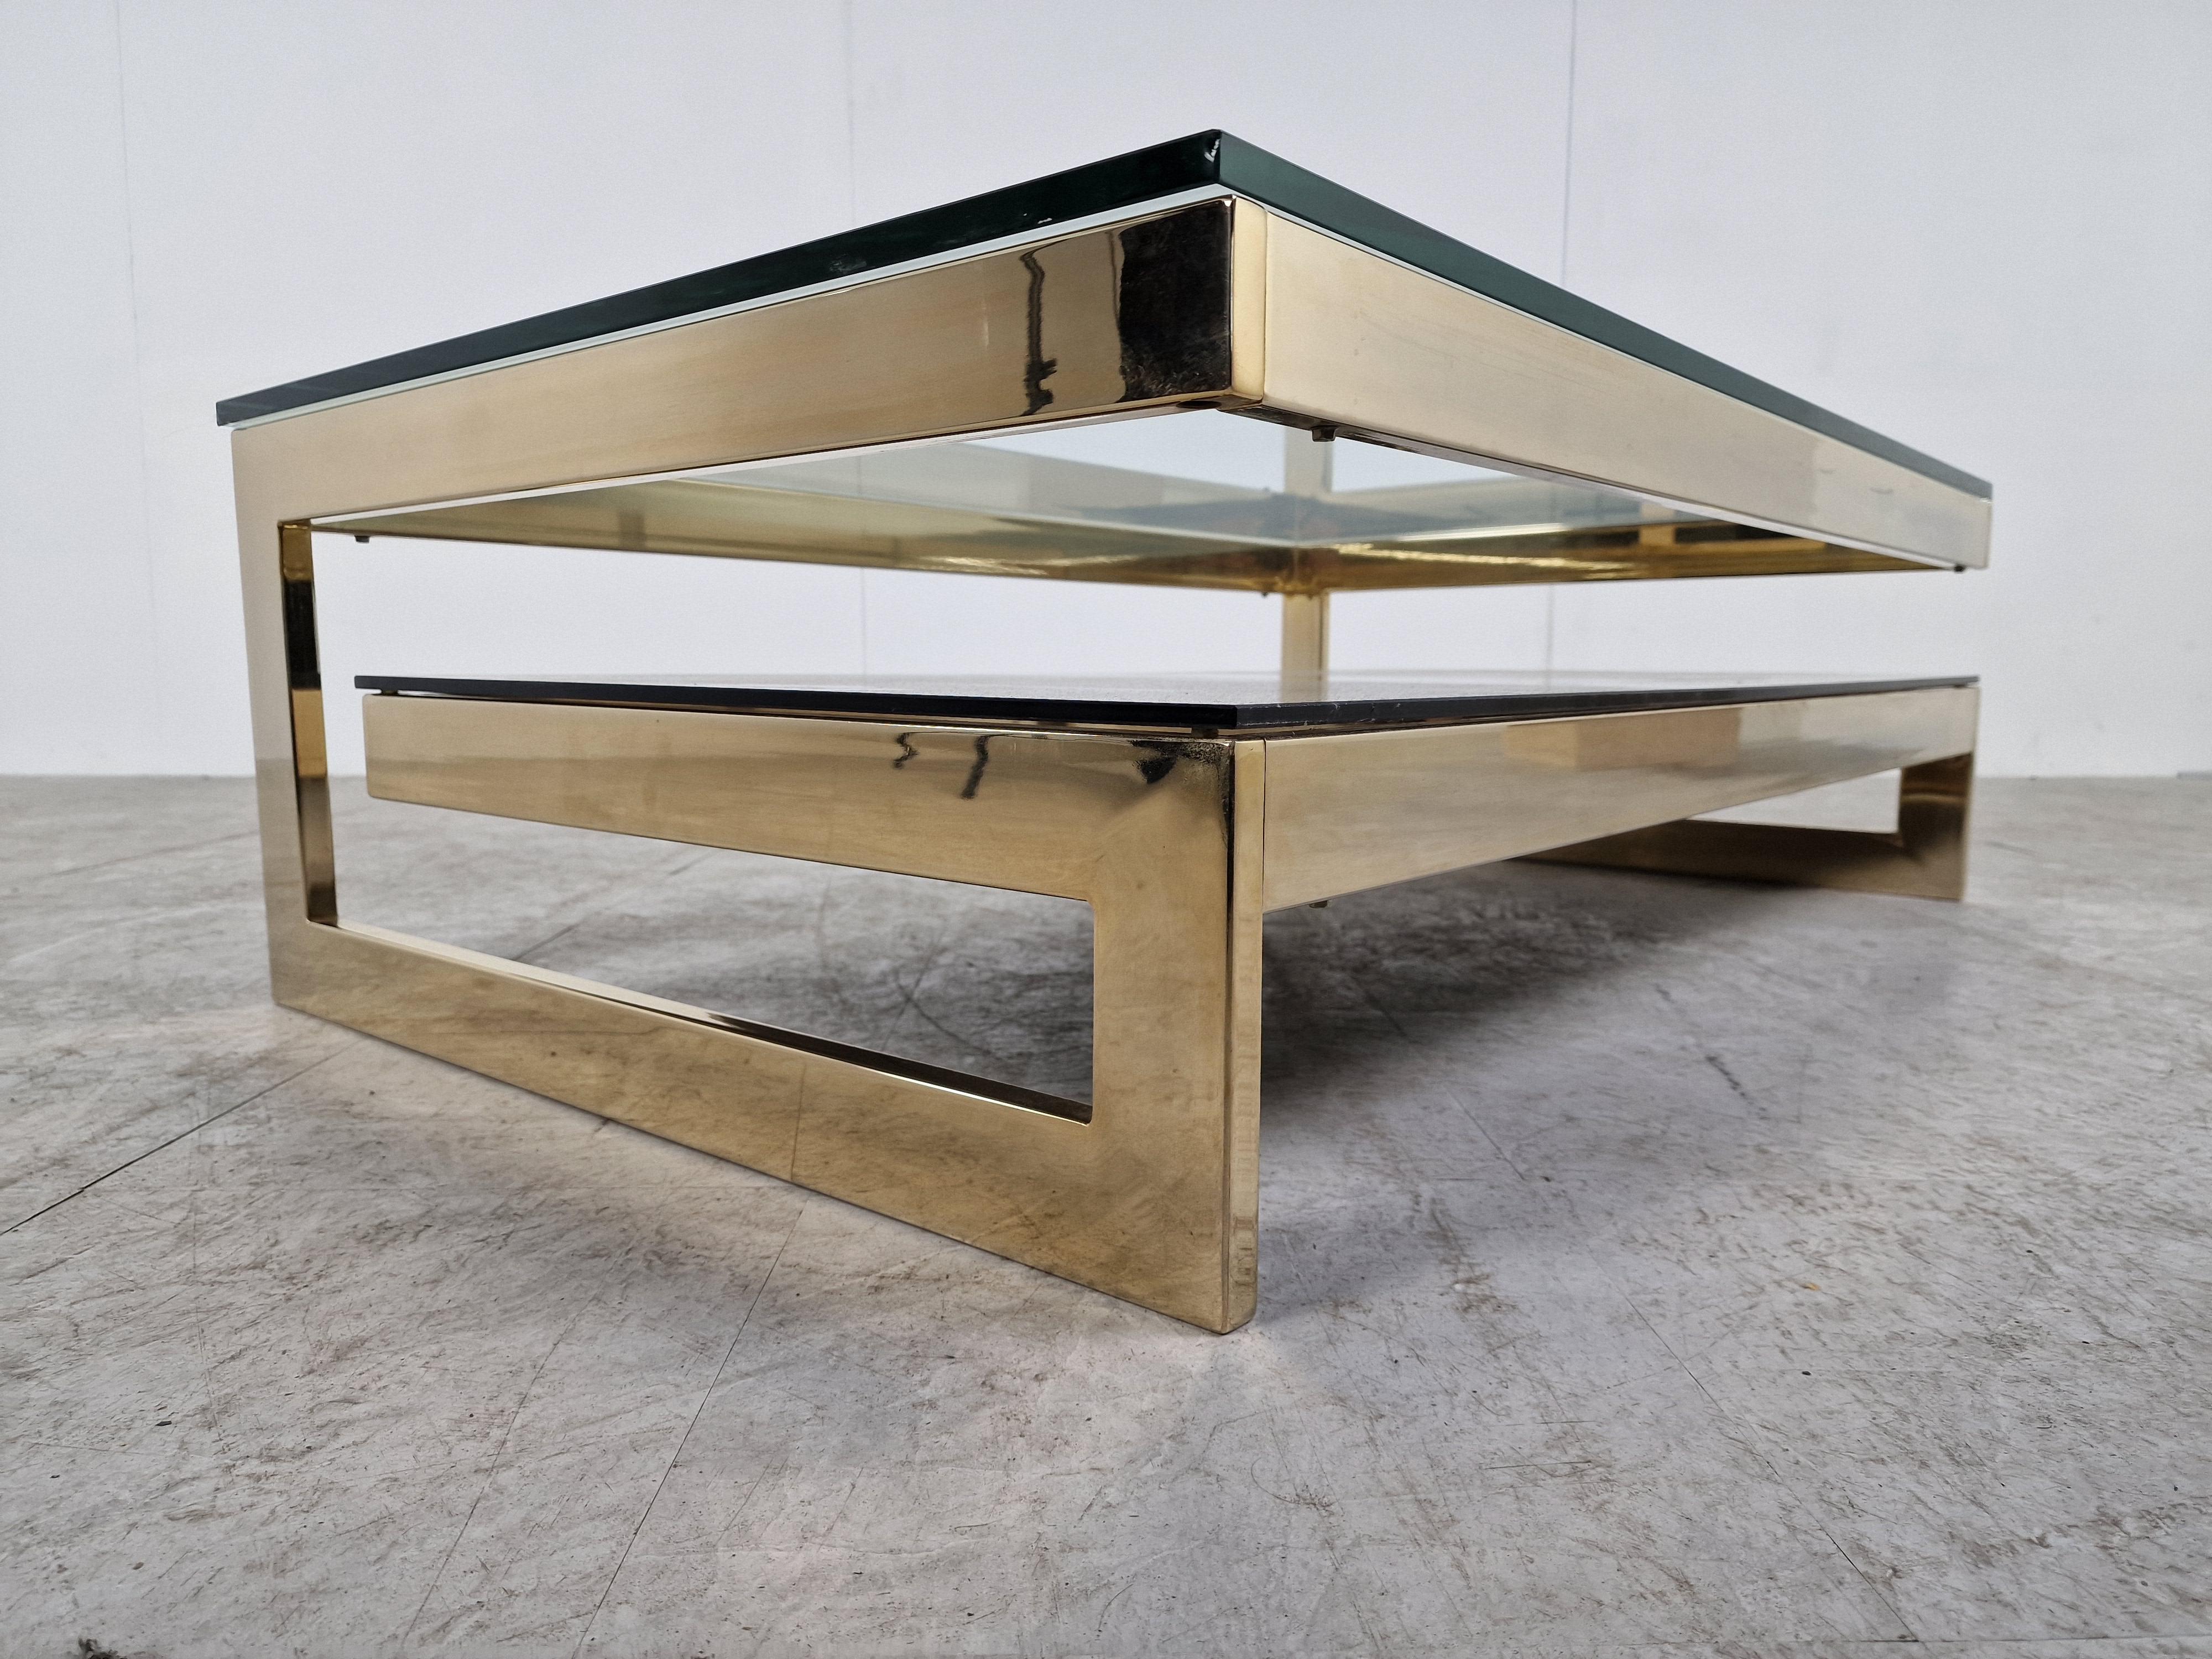 Quality 23kt gold layered and thick clear glass two tier coffee table manufactured by Belgochrom.

This table is a popular model and is referred to as the 'G' model.

Belgochrom produced quality furniture pieces with a luxurious appeal.

Good